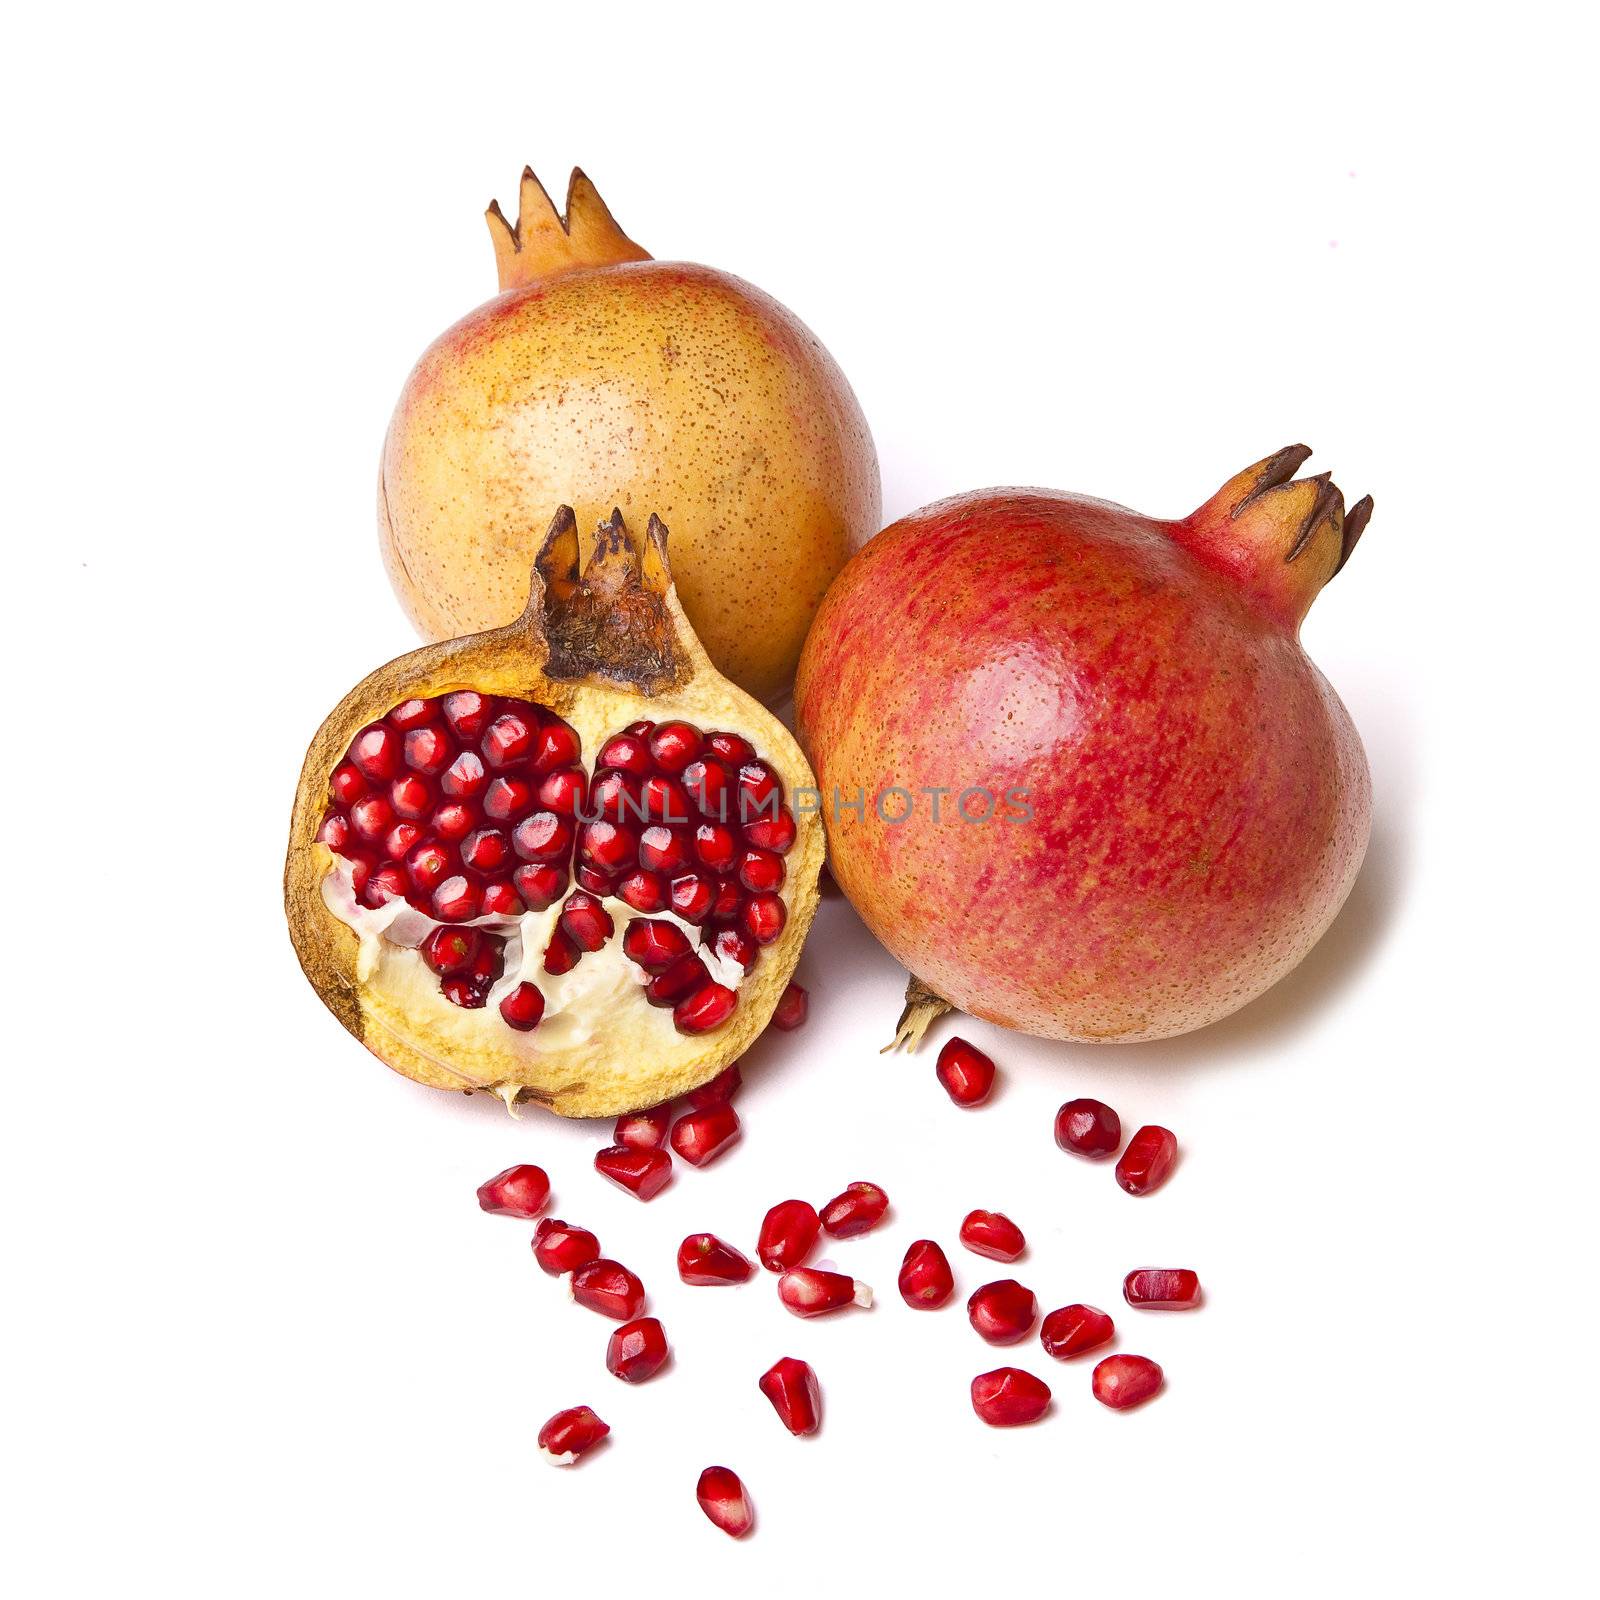 Pomegranate on white by adamr